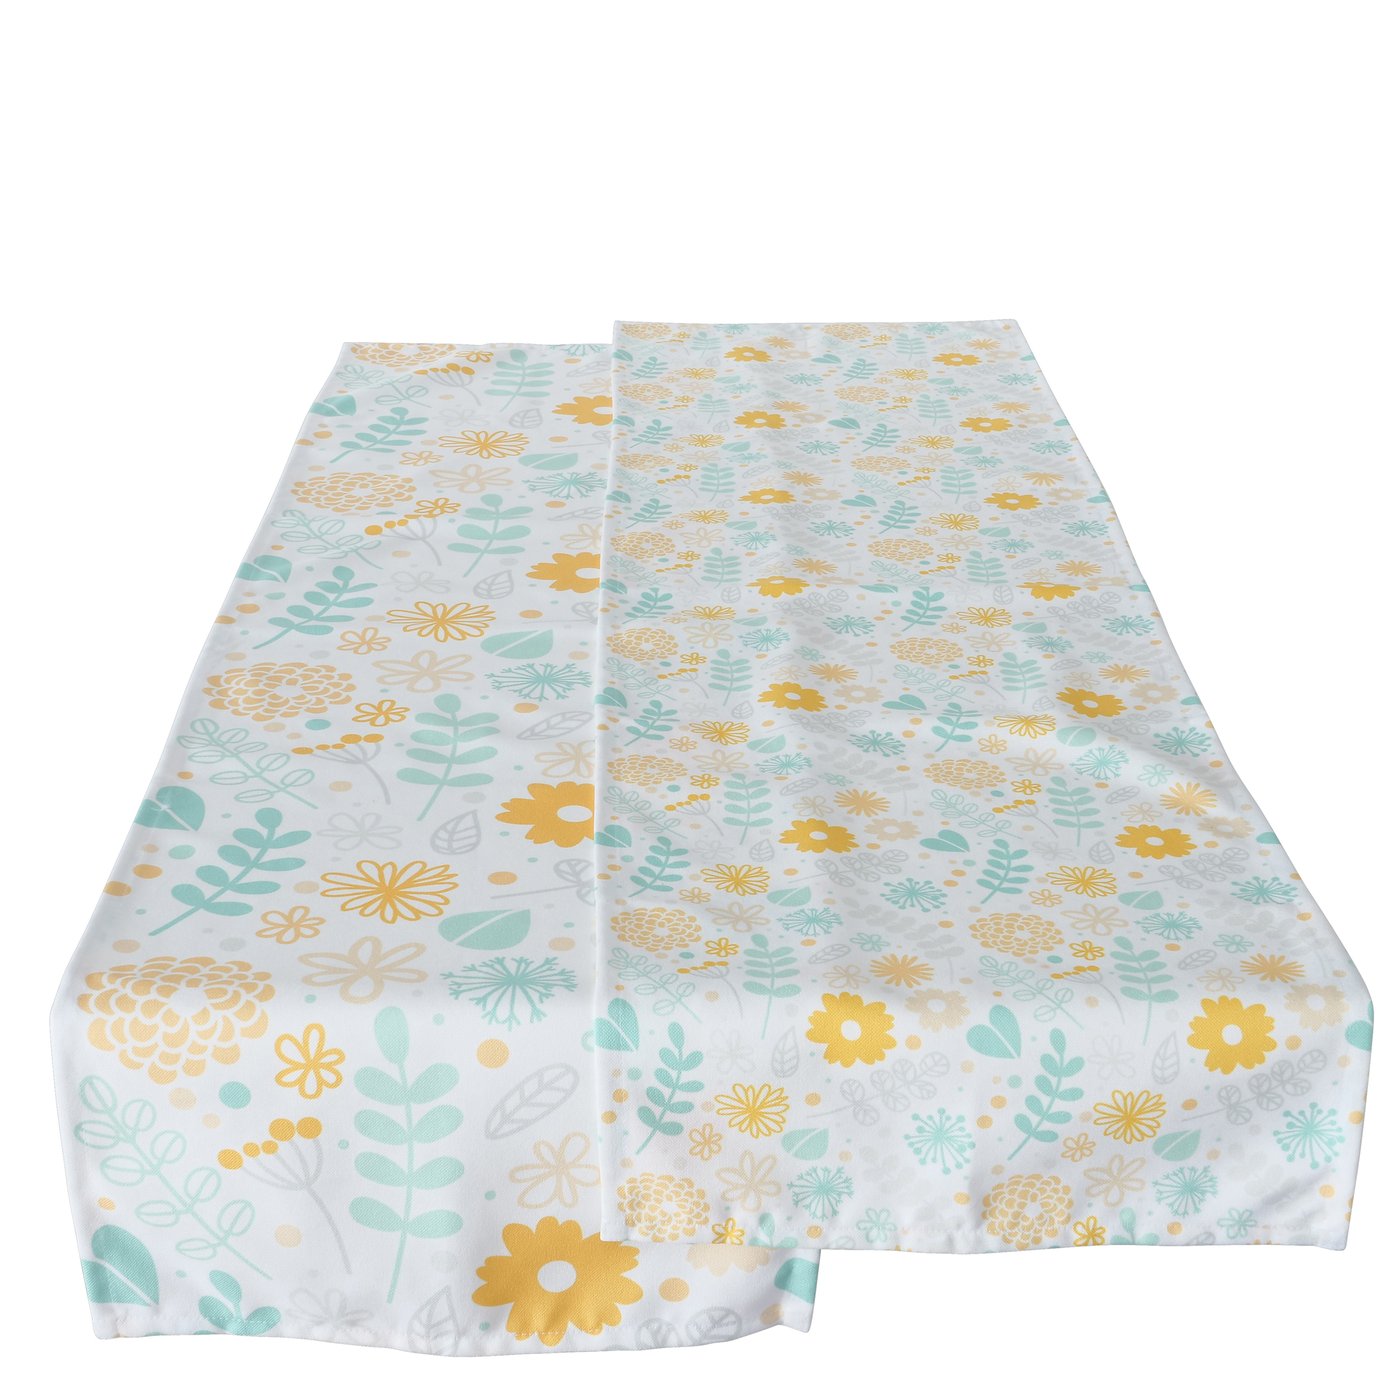 &Quirky Floral Spring Table Runner : Large Print or Small Print